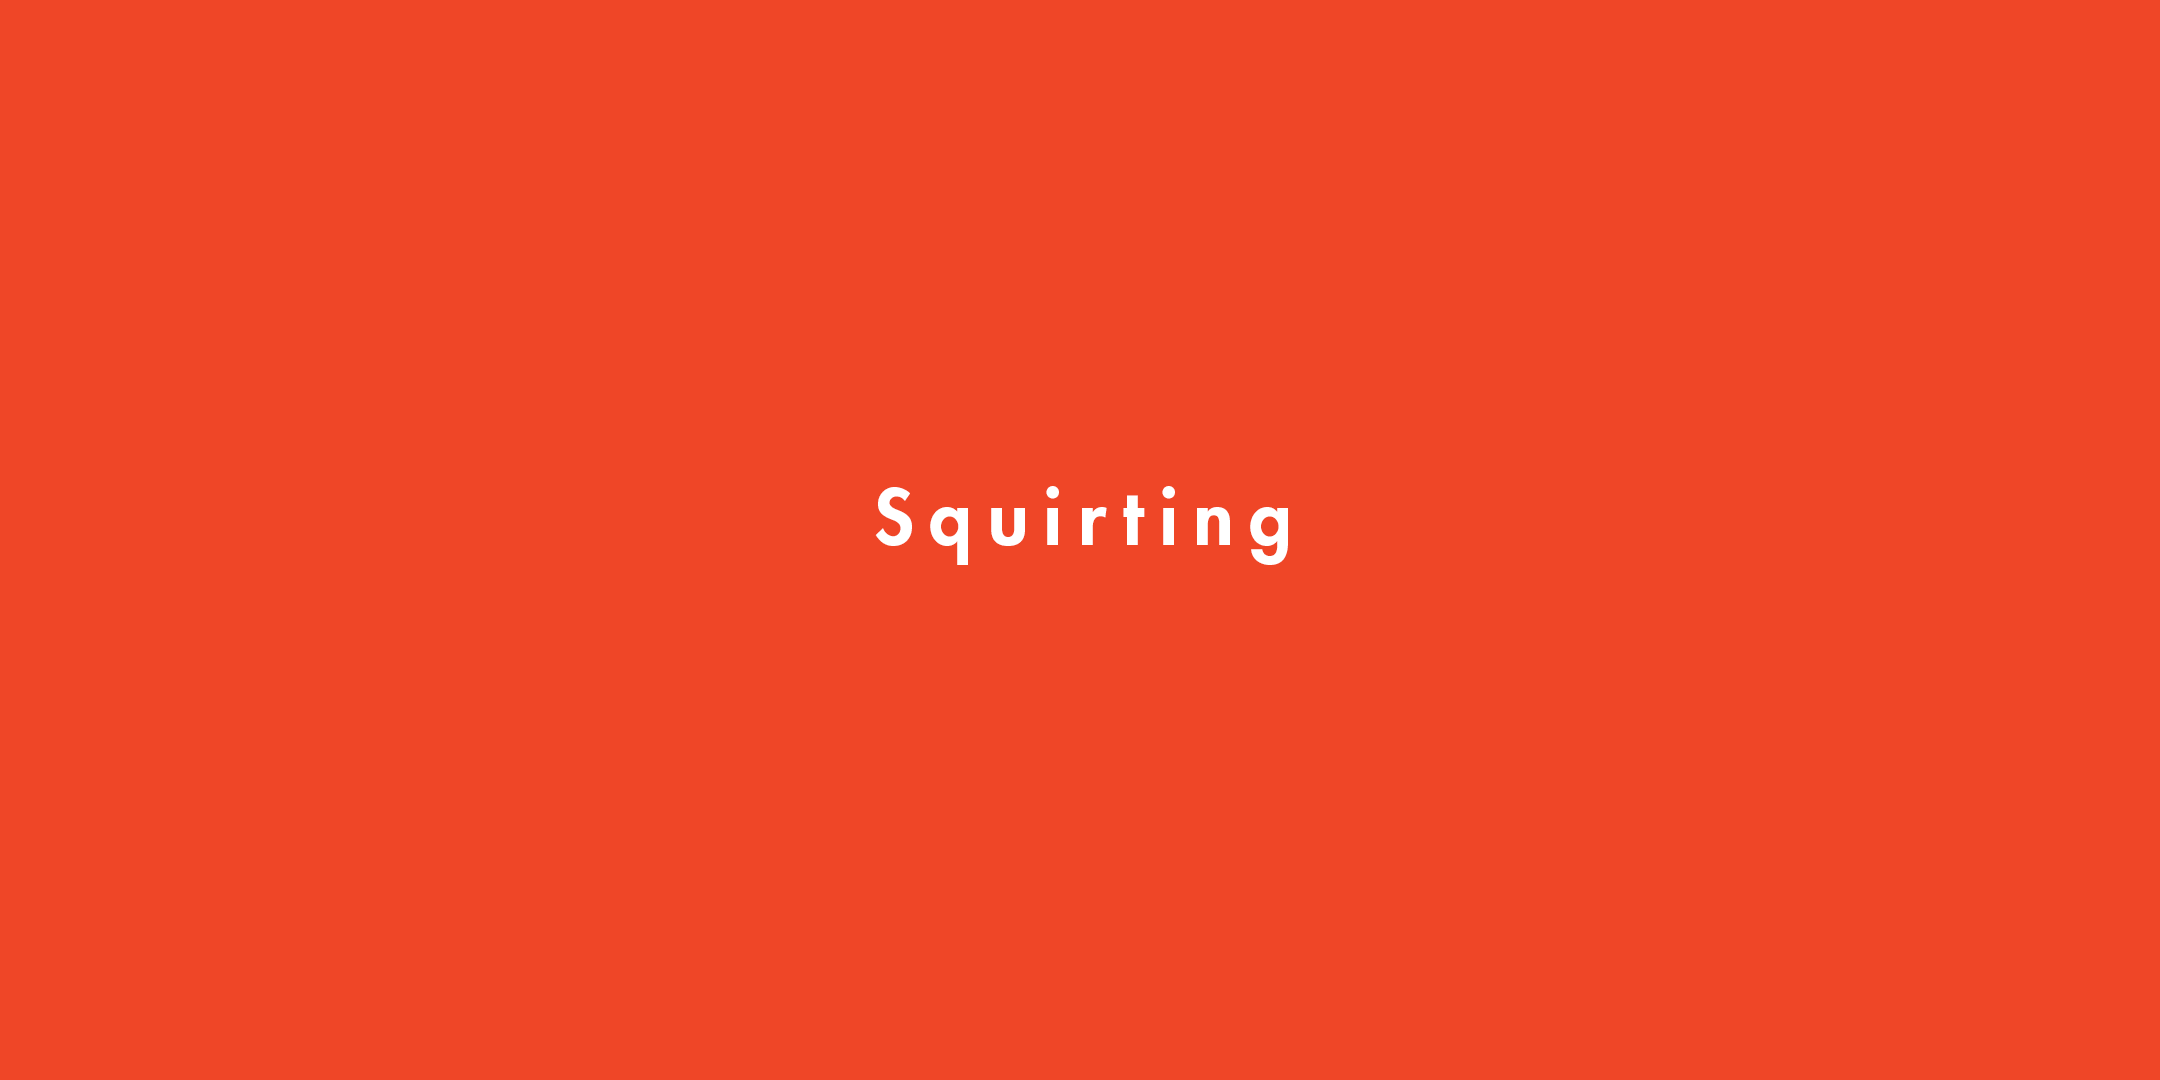 Squirting Definition image picture